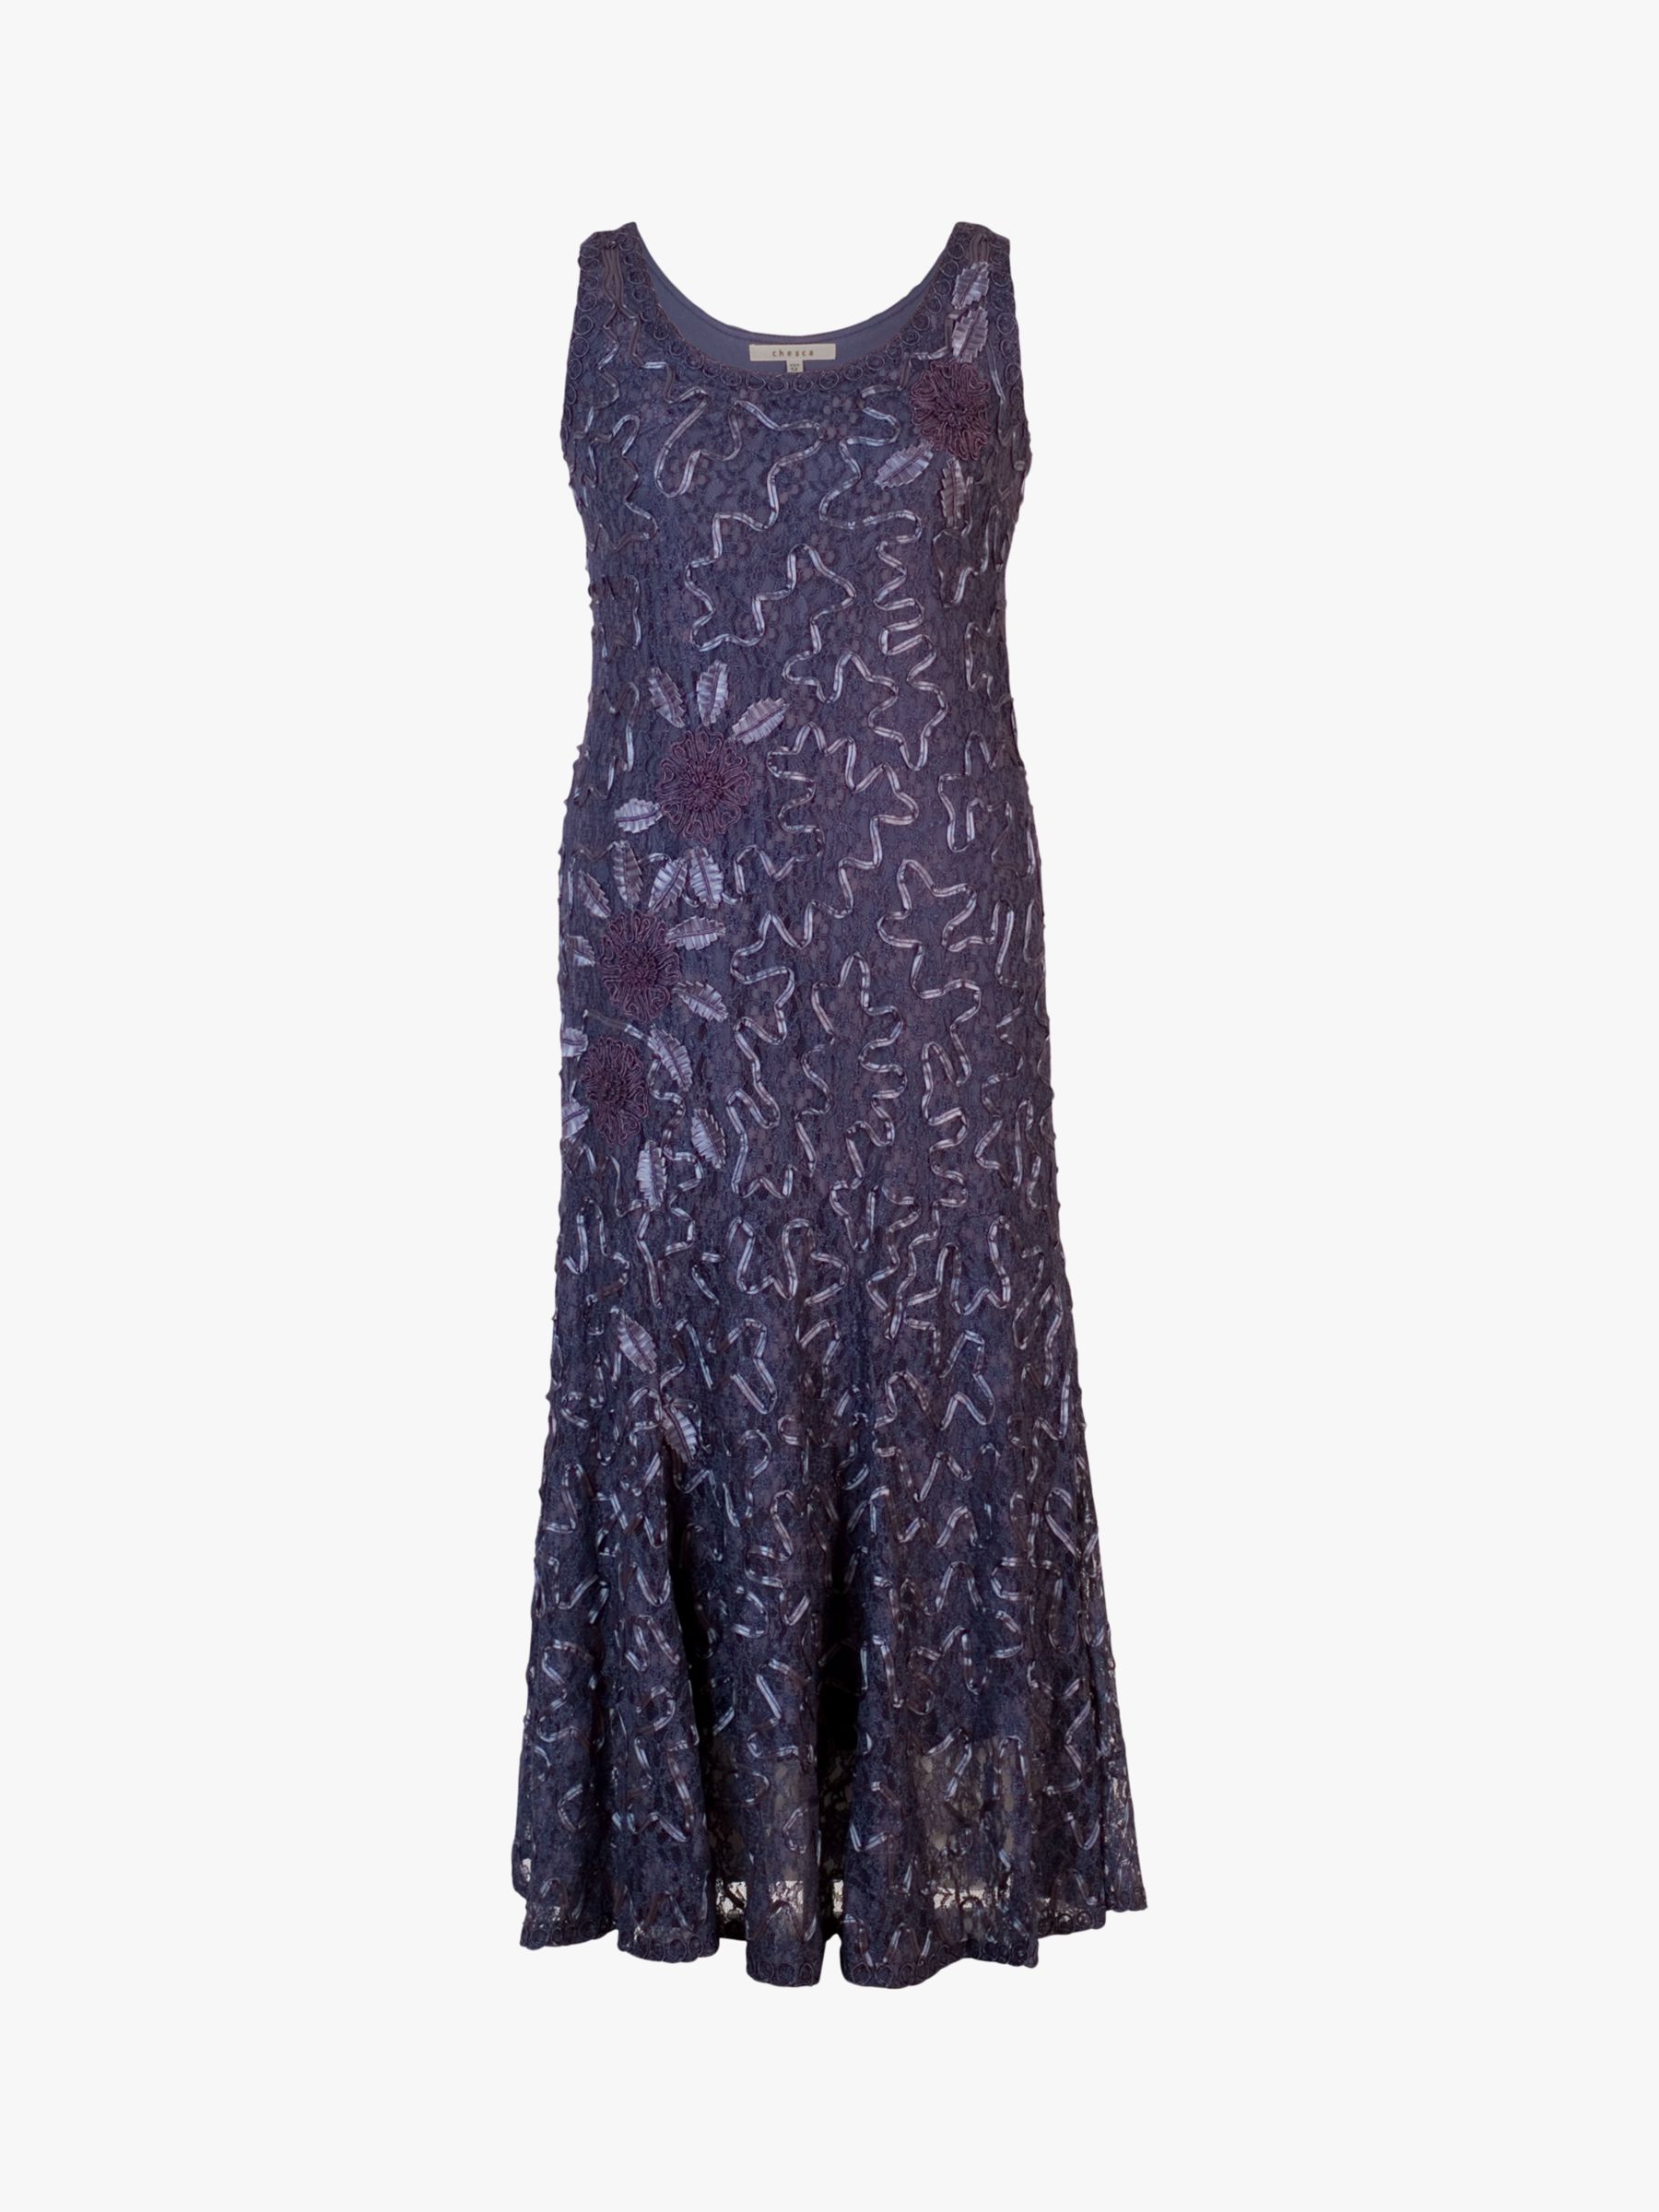 chesca Cornelli Floral Lace Maxi Dress, Hyacinth at John Lewis & Partners